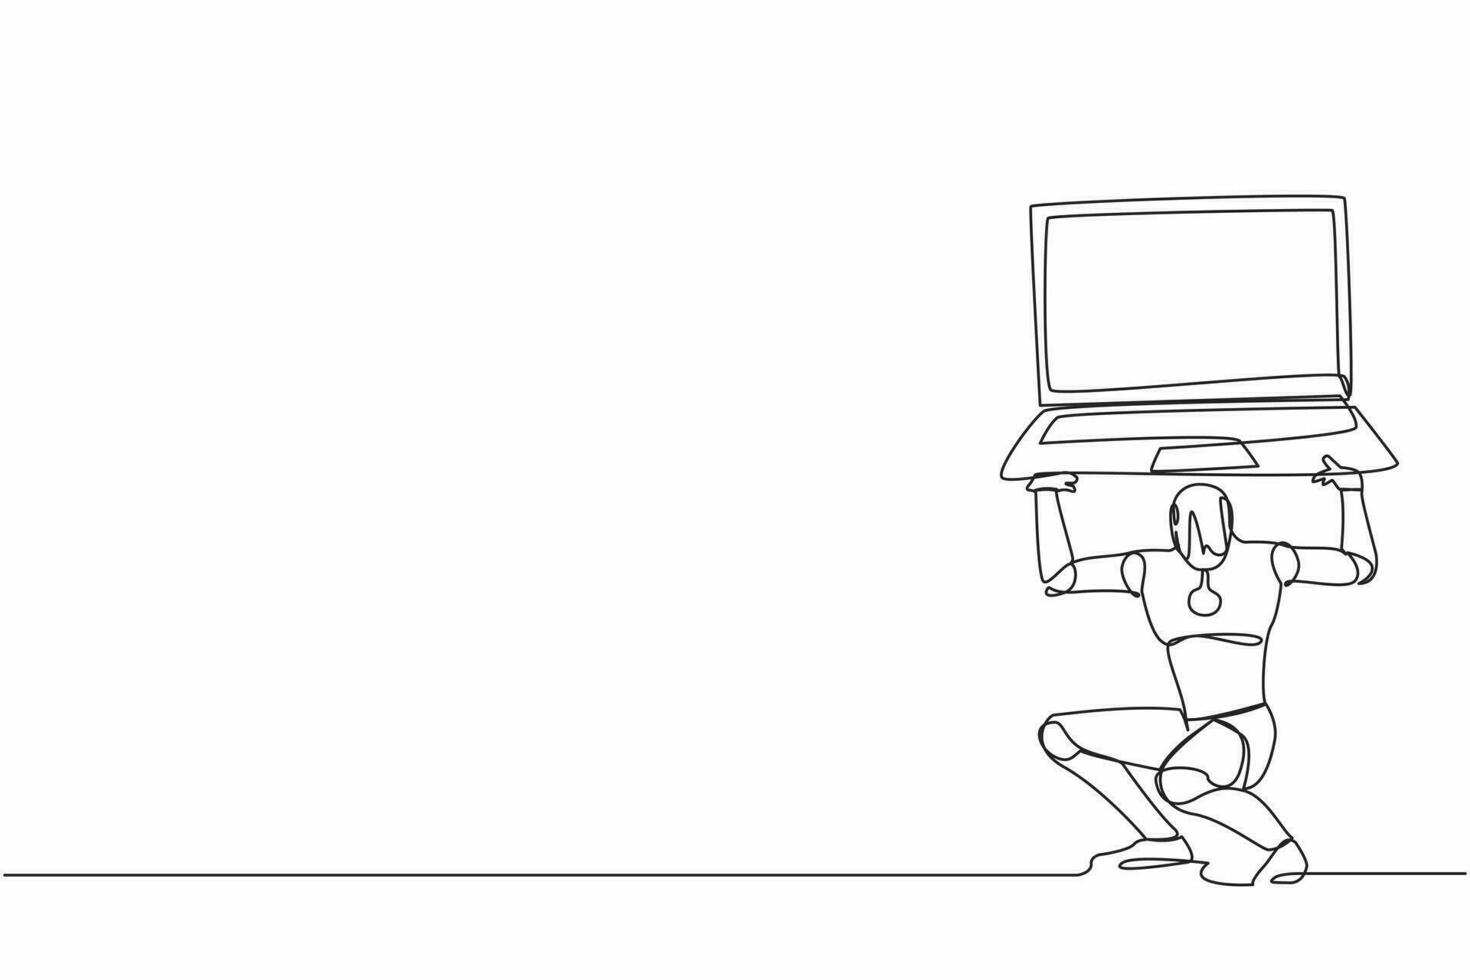 Single continuous line drawing of tired robot carrying heavy laptop computer on his back. Fatigue or burnout work at tech industry. Robotic artificial intelligence. One line design vector illustration